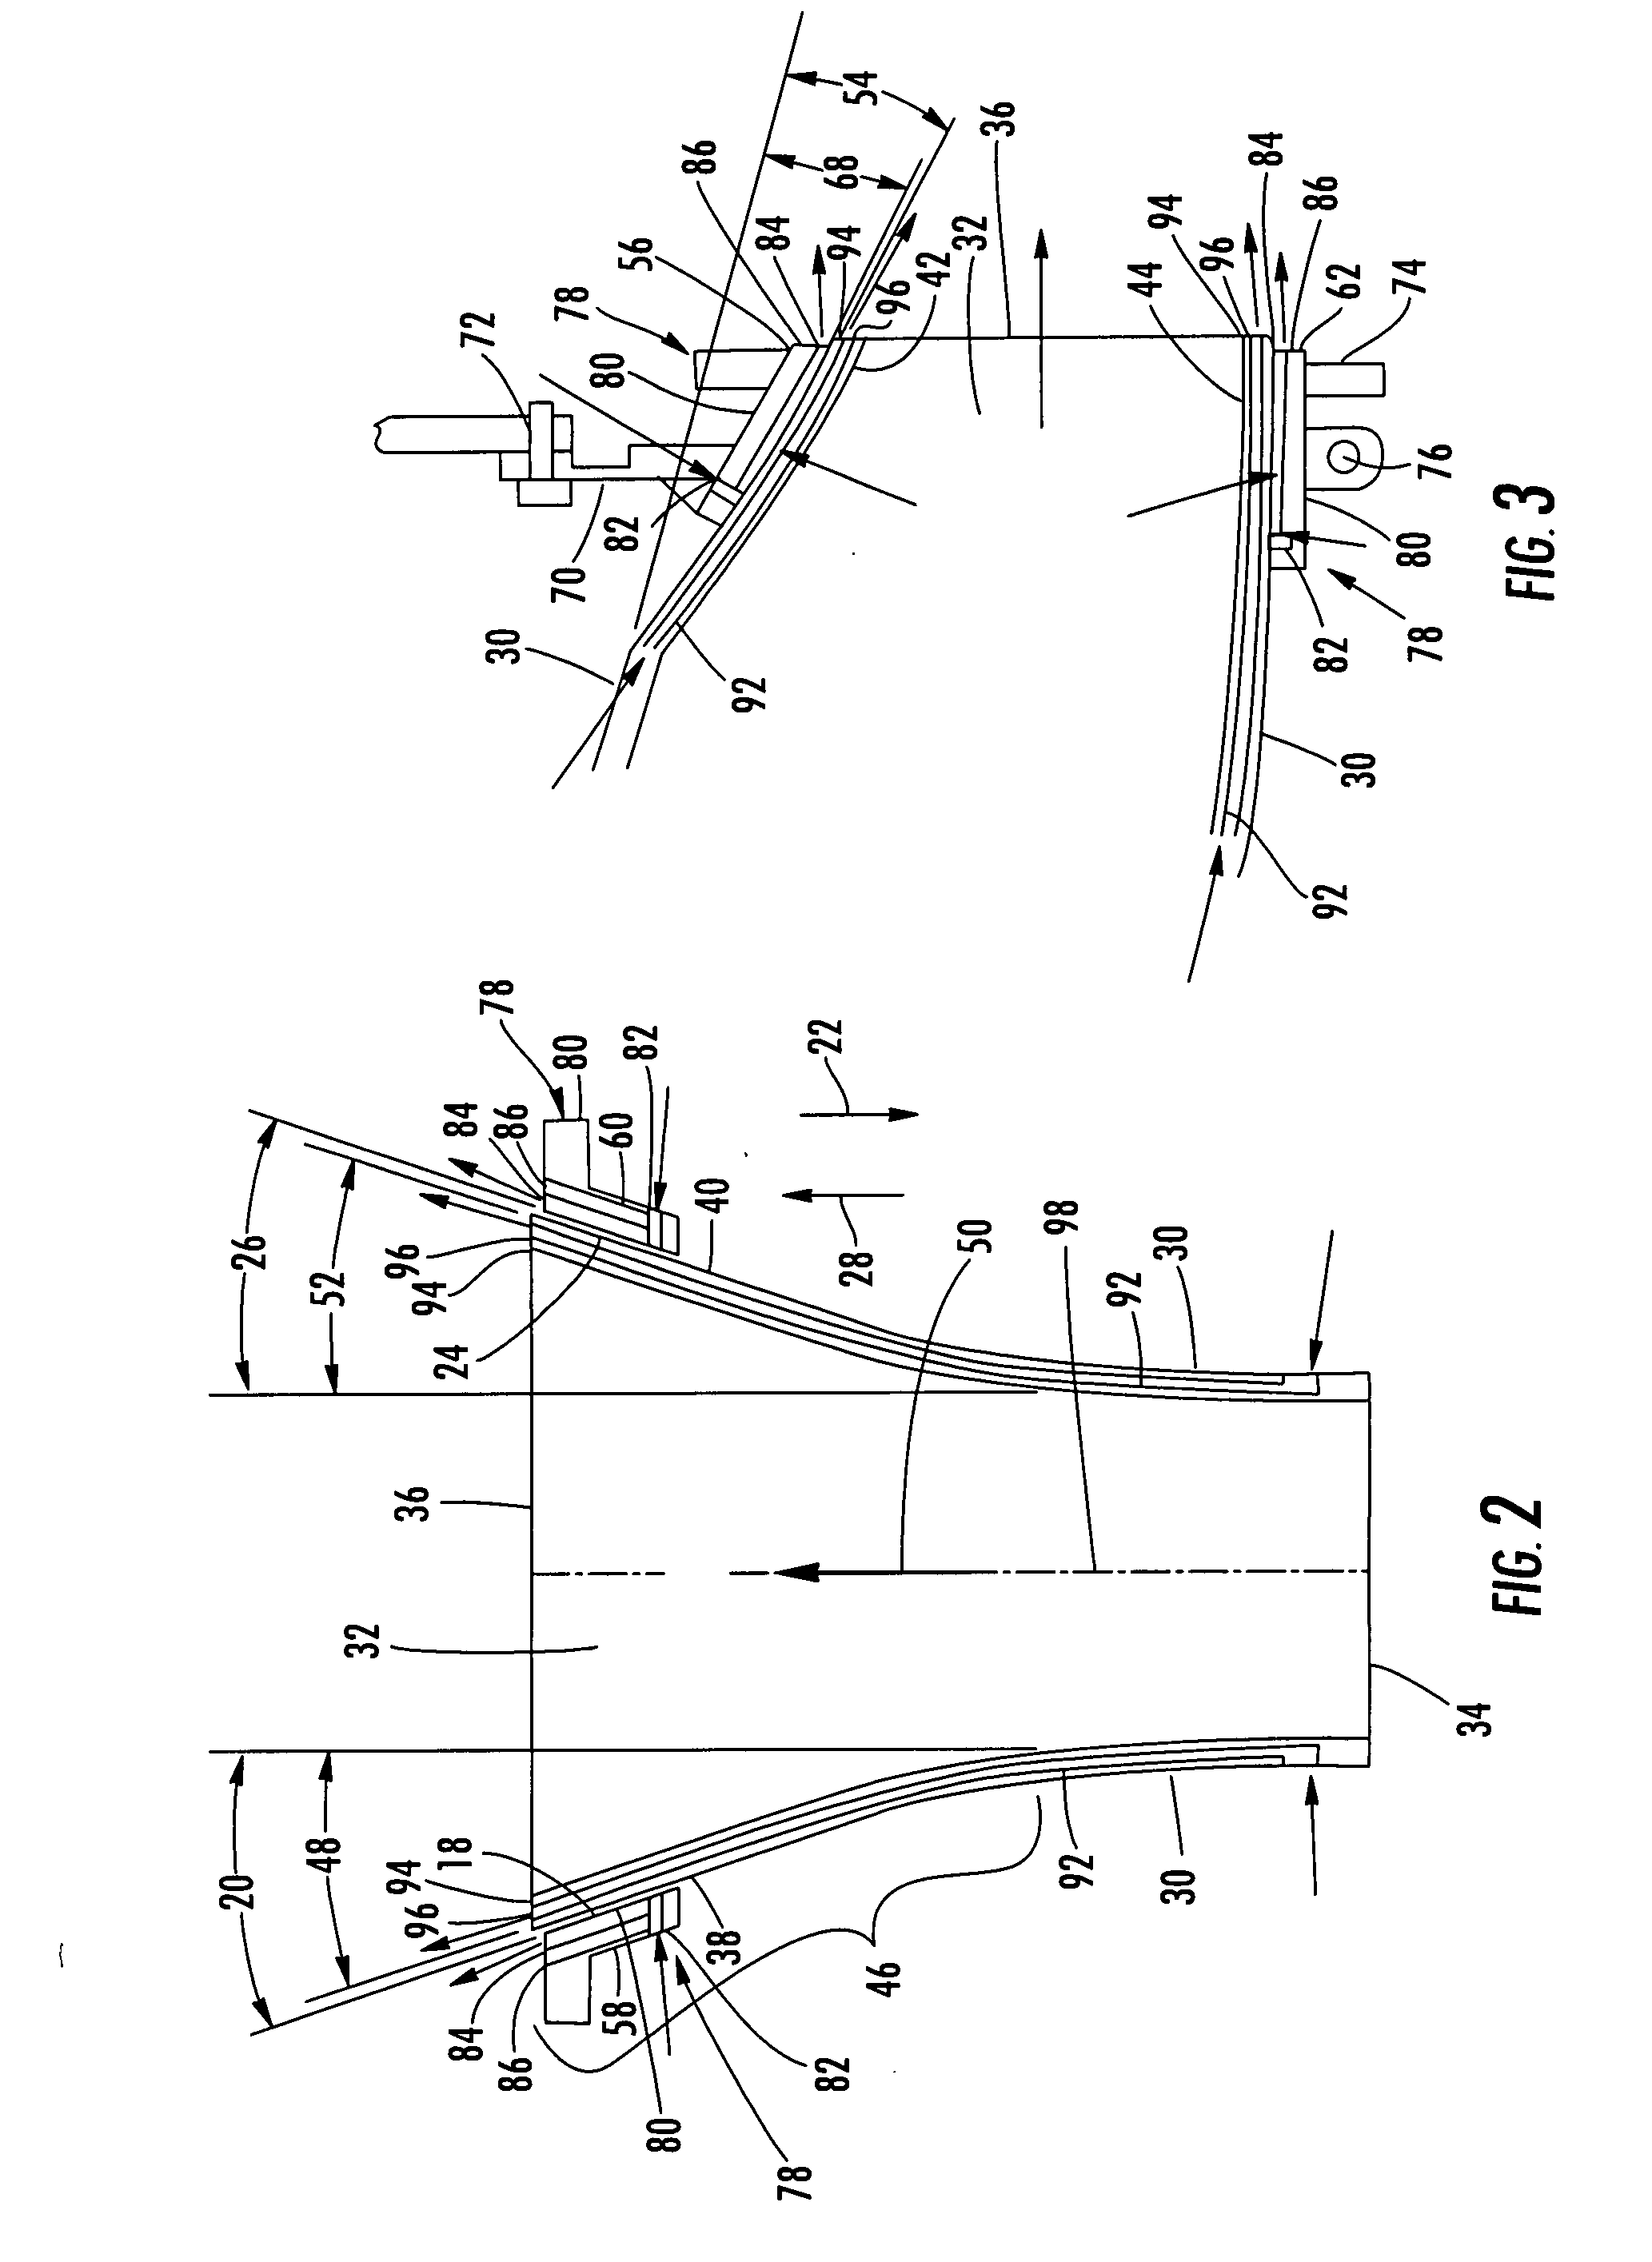 Transition support system for combustion transition ducts for turbine engines